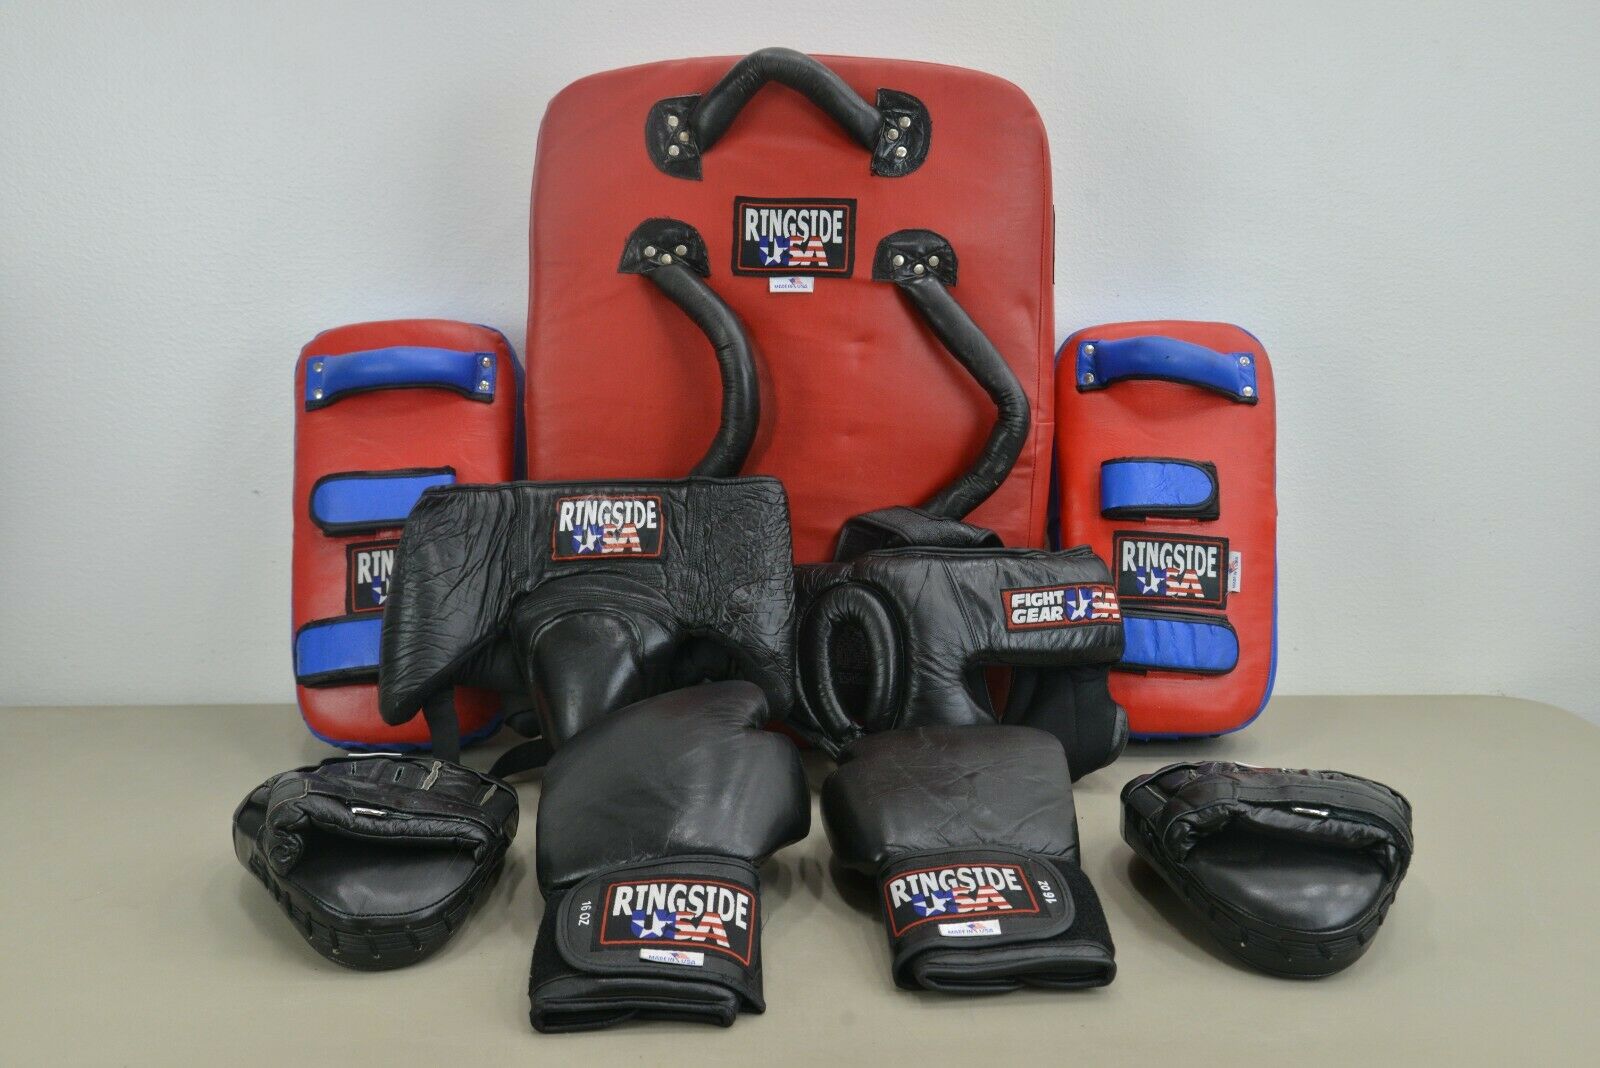 Ringside Boxing Training Gear Martial Arts MMA Fight Gear Size Large